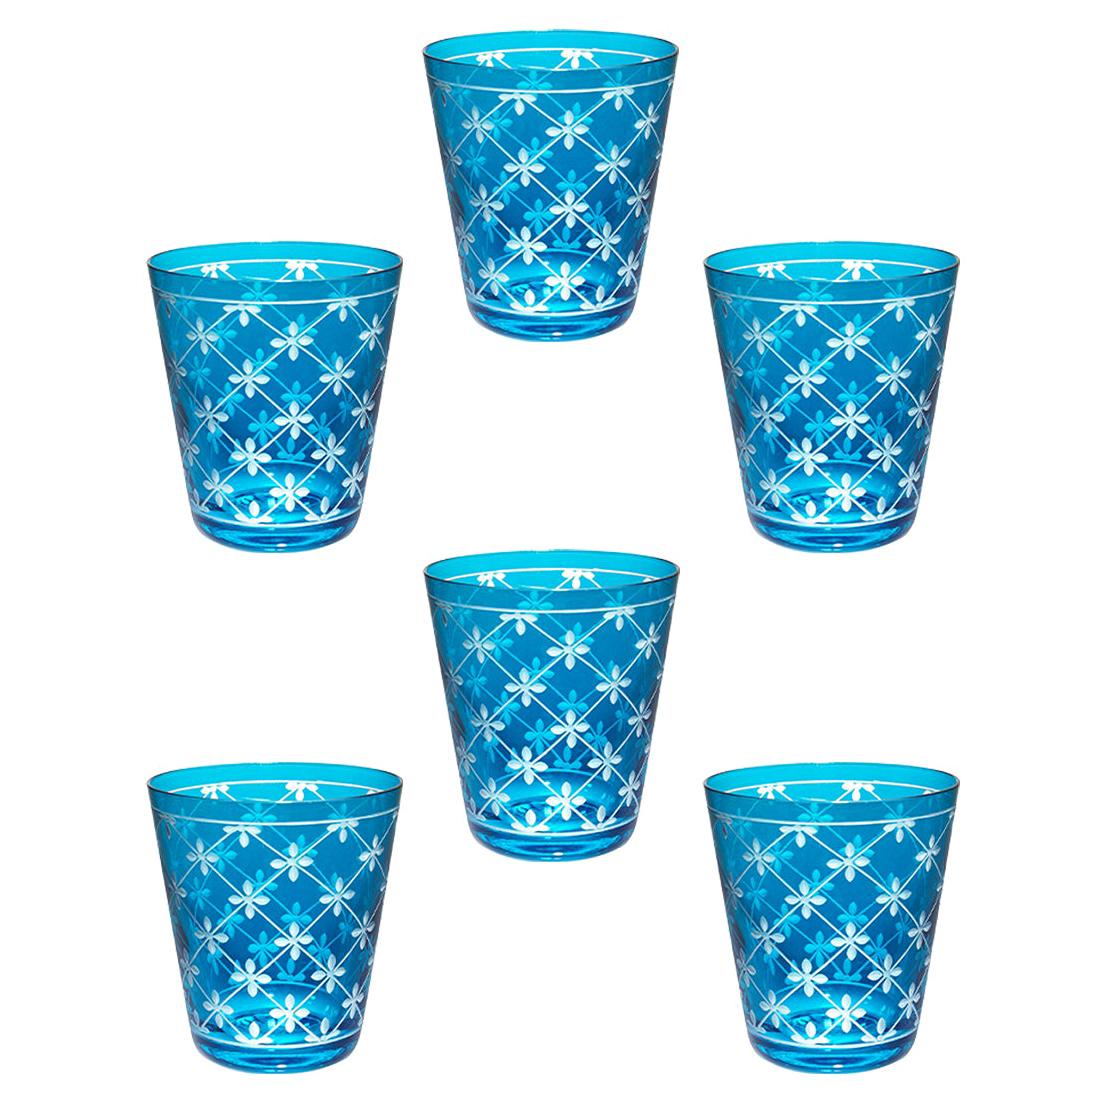  Country Style Set of Six Tumbler Blue Crystal Sofina Boutique Kitzbuehel For Sale